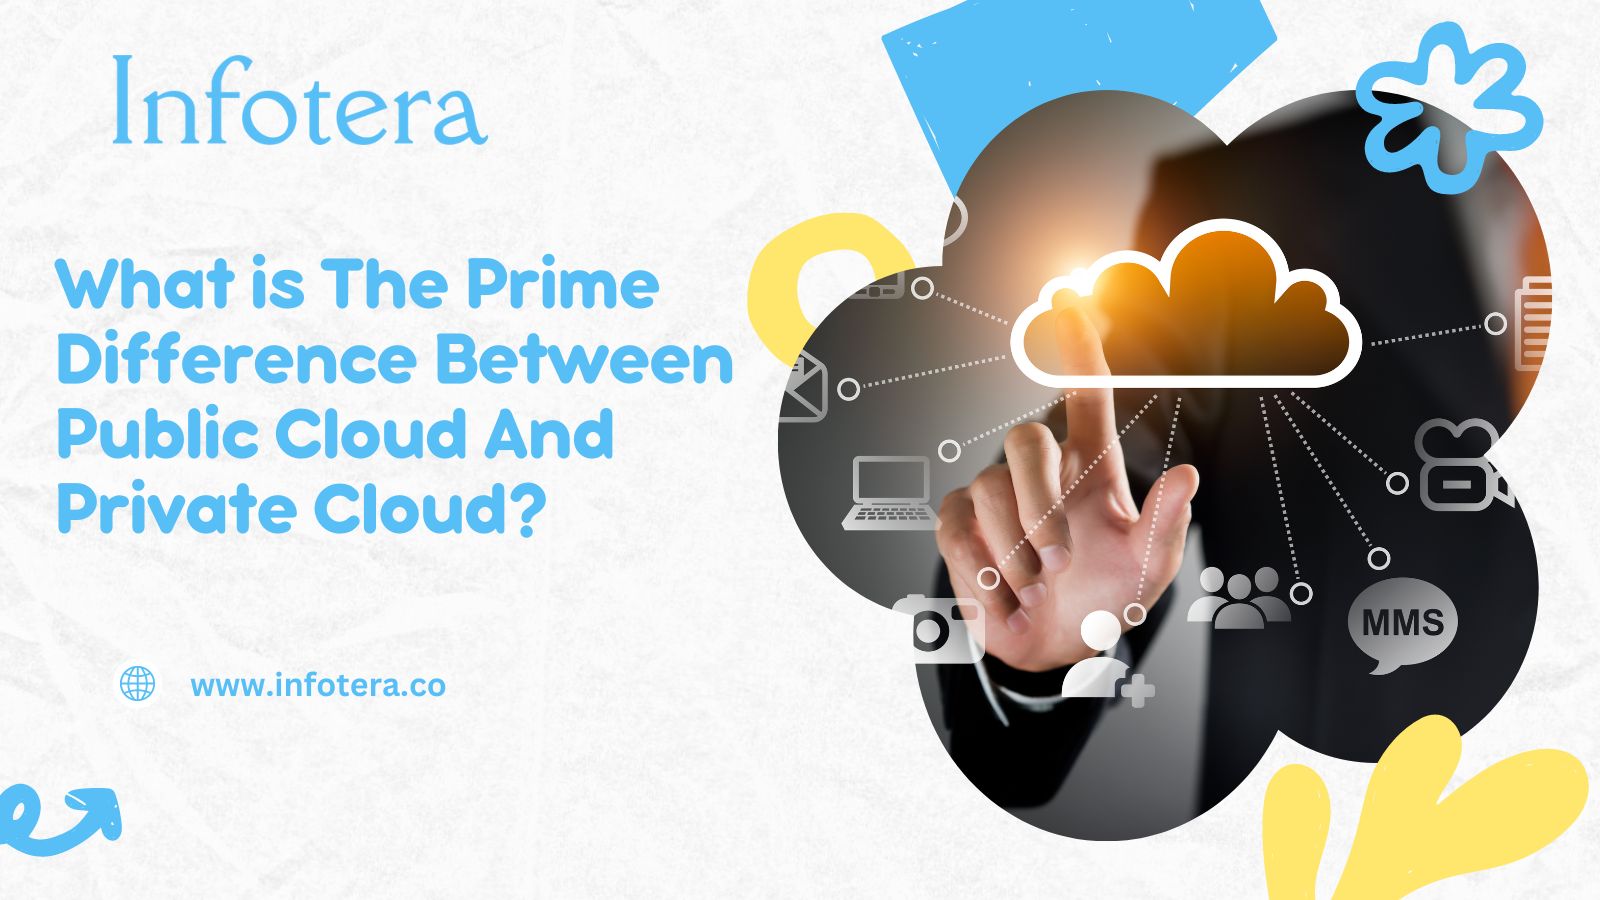 What is The Prime Difference Between Public Cloud And Private Cloud